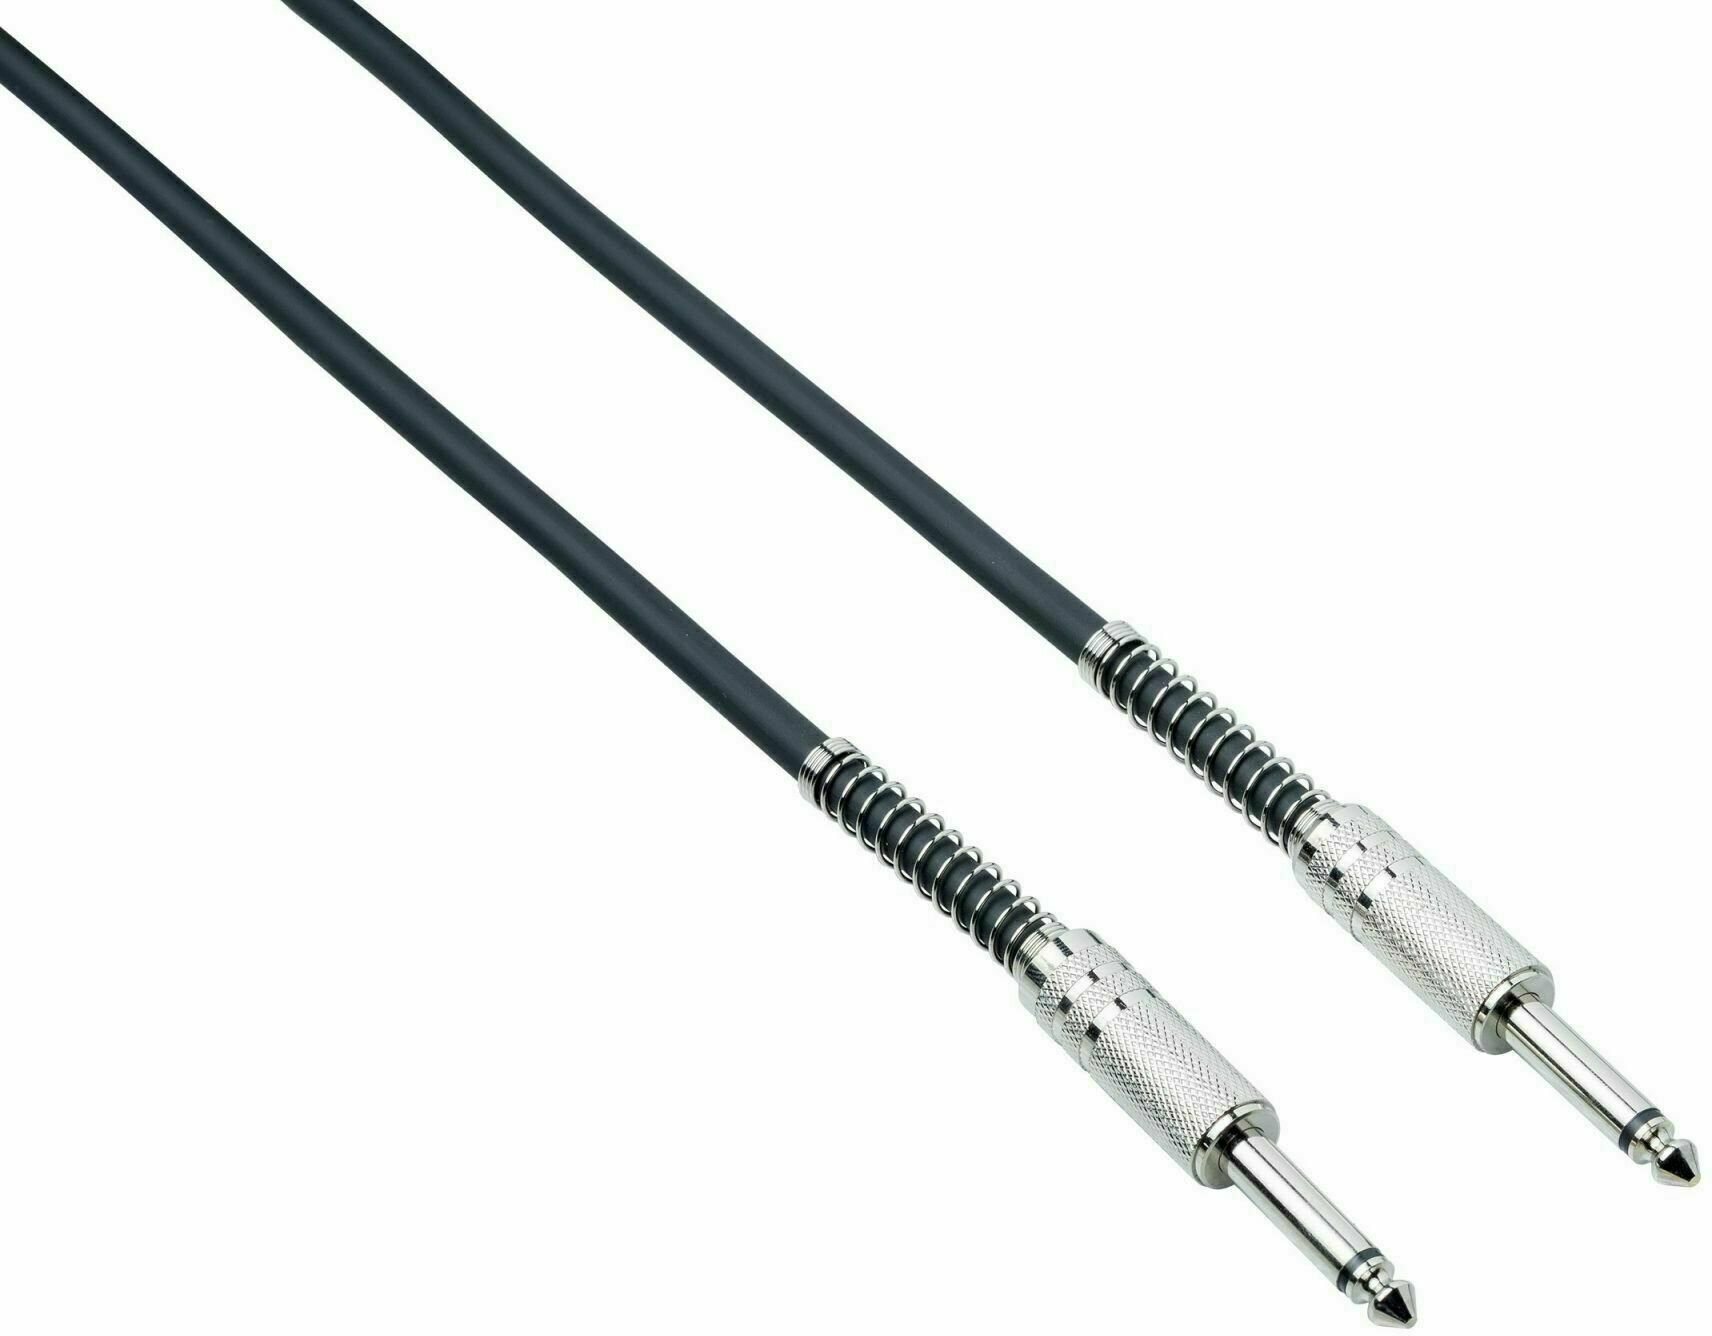 Adapter/Patch Cable Bespeco IRO 100 Black 100 cm Straight - Straight